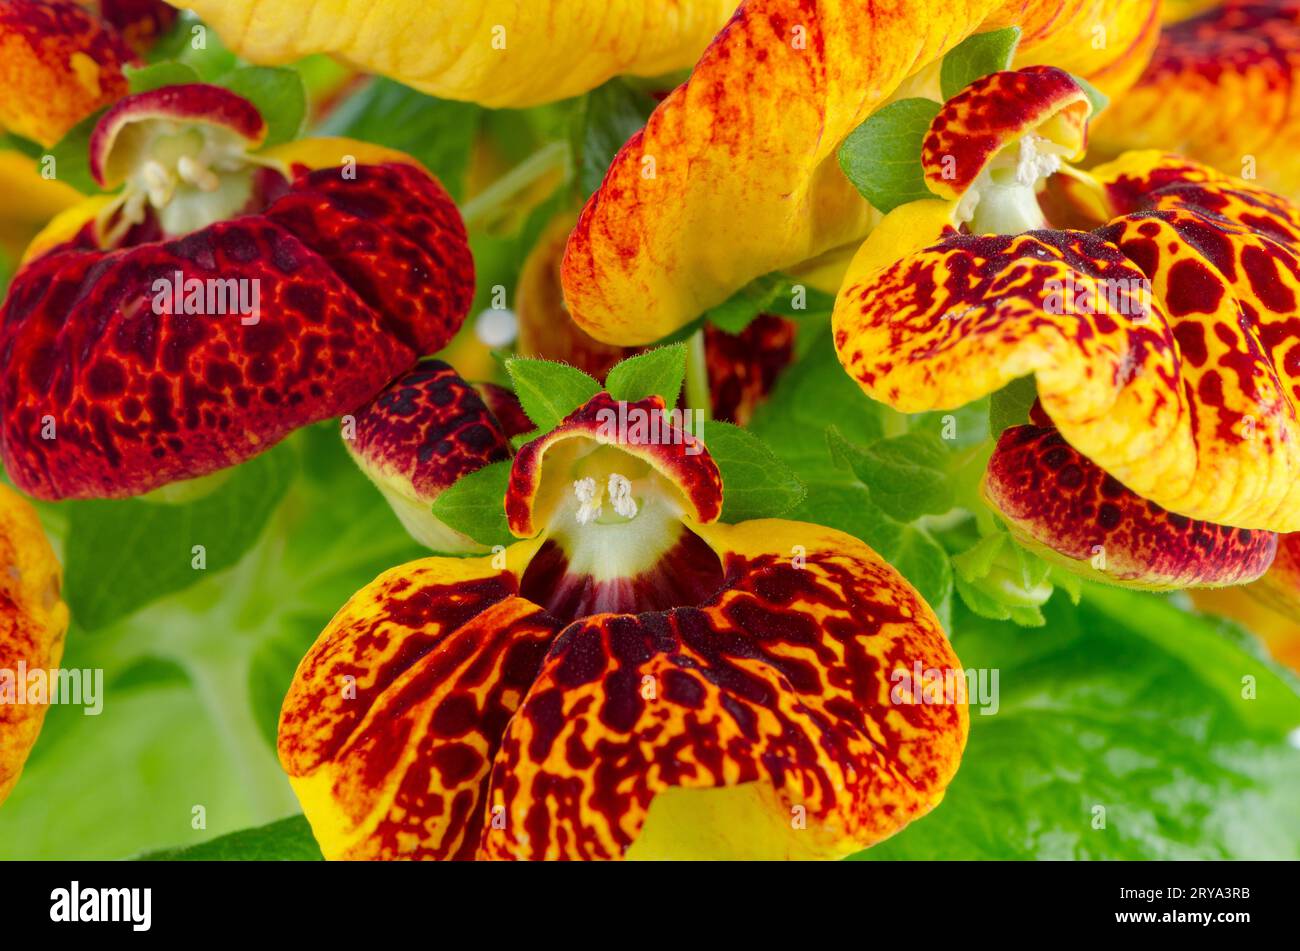 Closeup of yellow and red calceolarua flowers Stock Photo